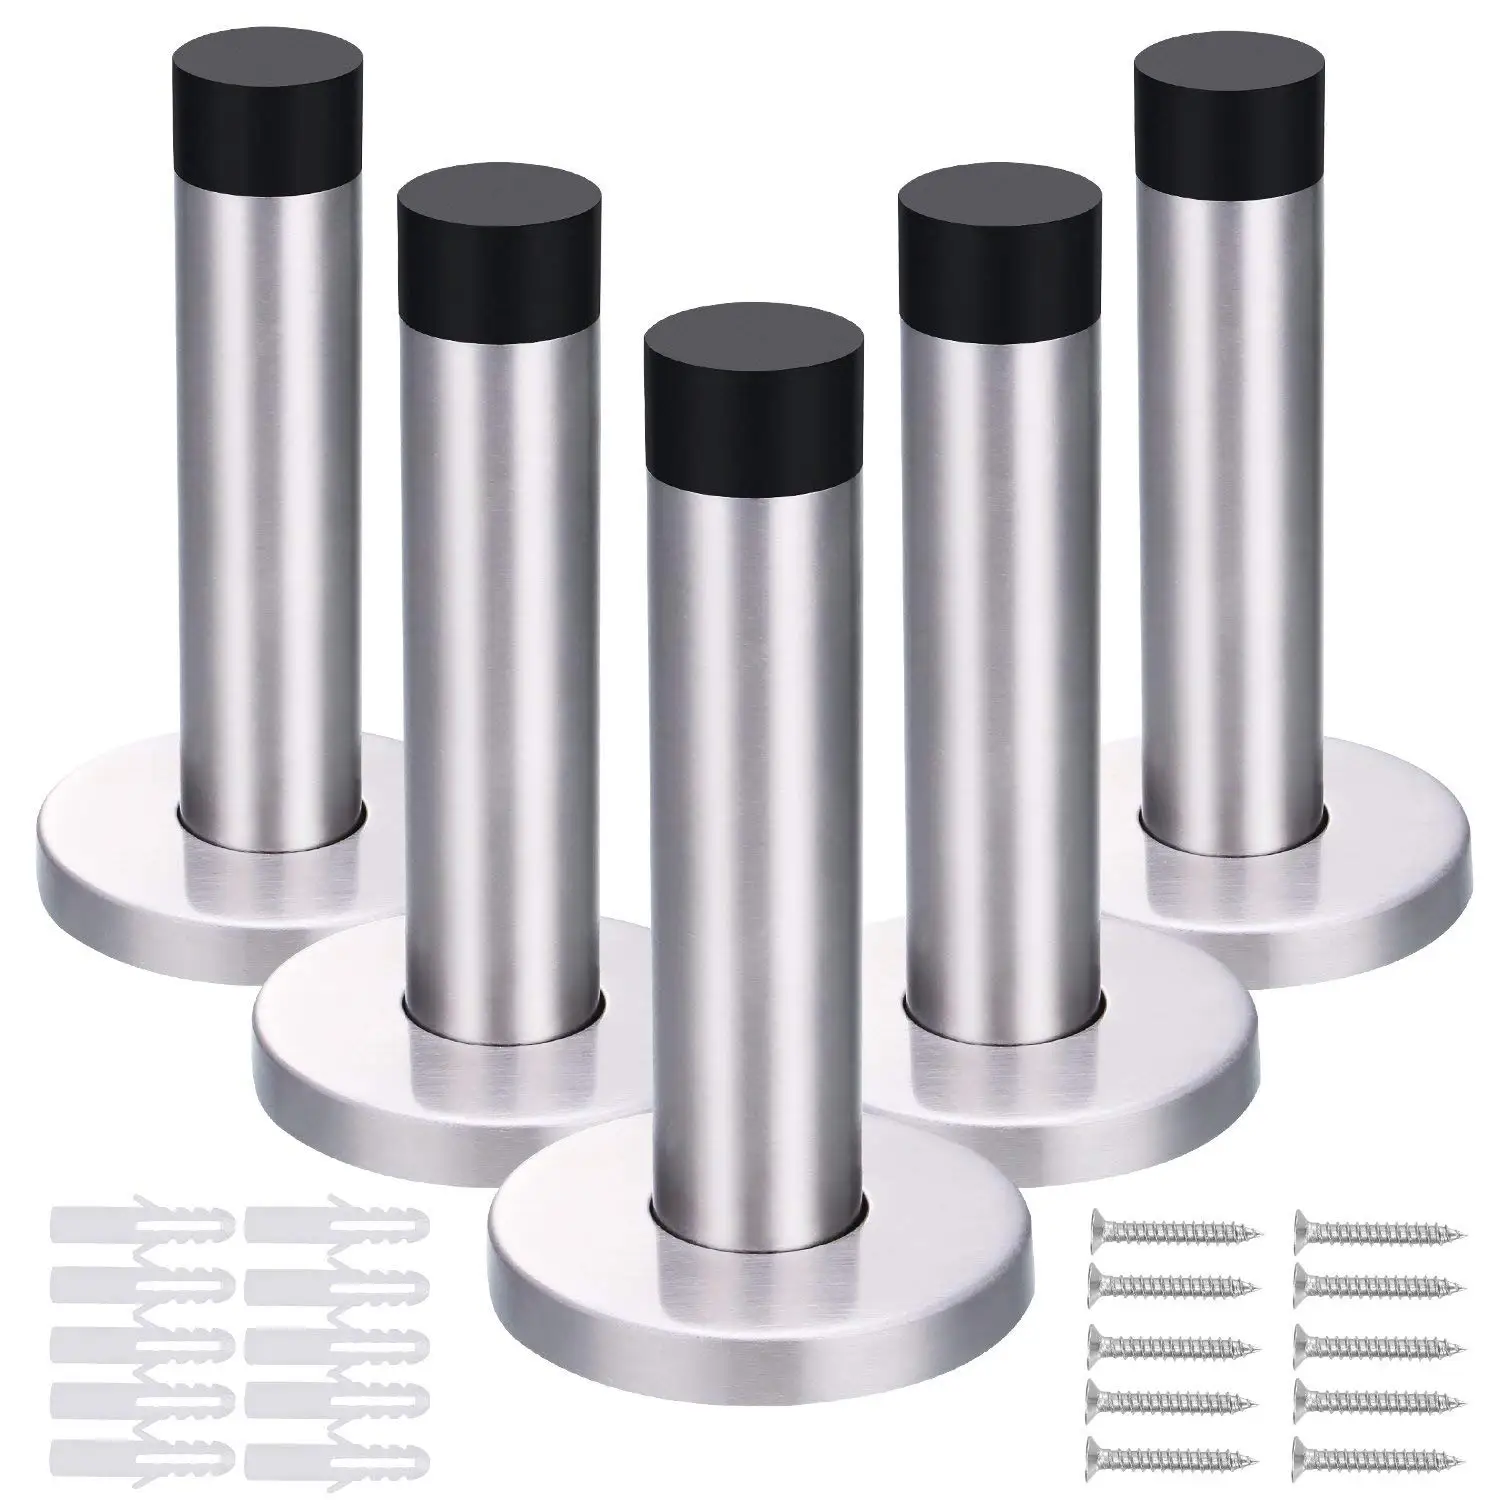 

5 Pack 90 mm Door Stop 304 stainless steel Door Stopper Holder with Screws and Drywall Anchors